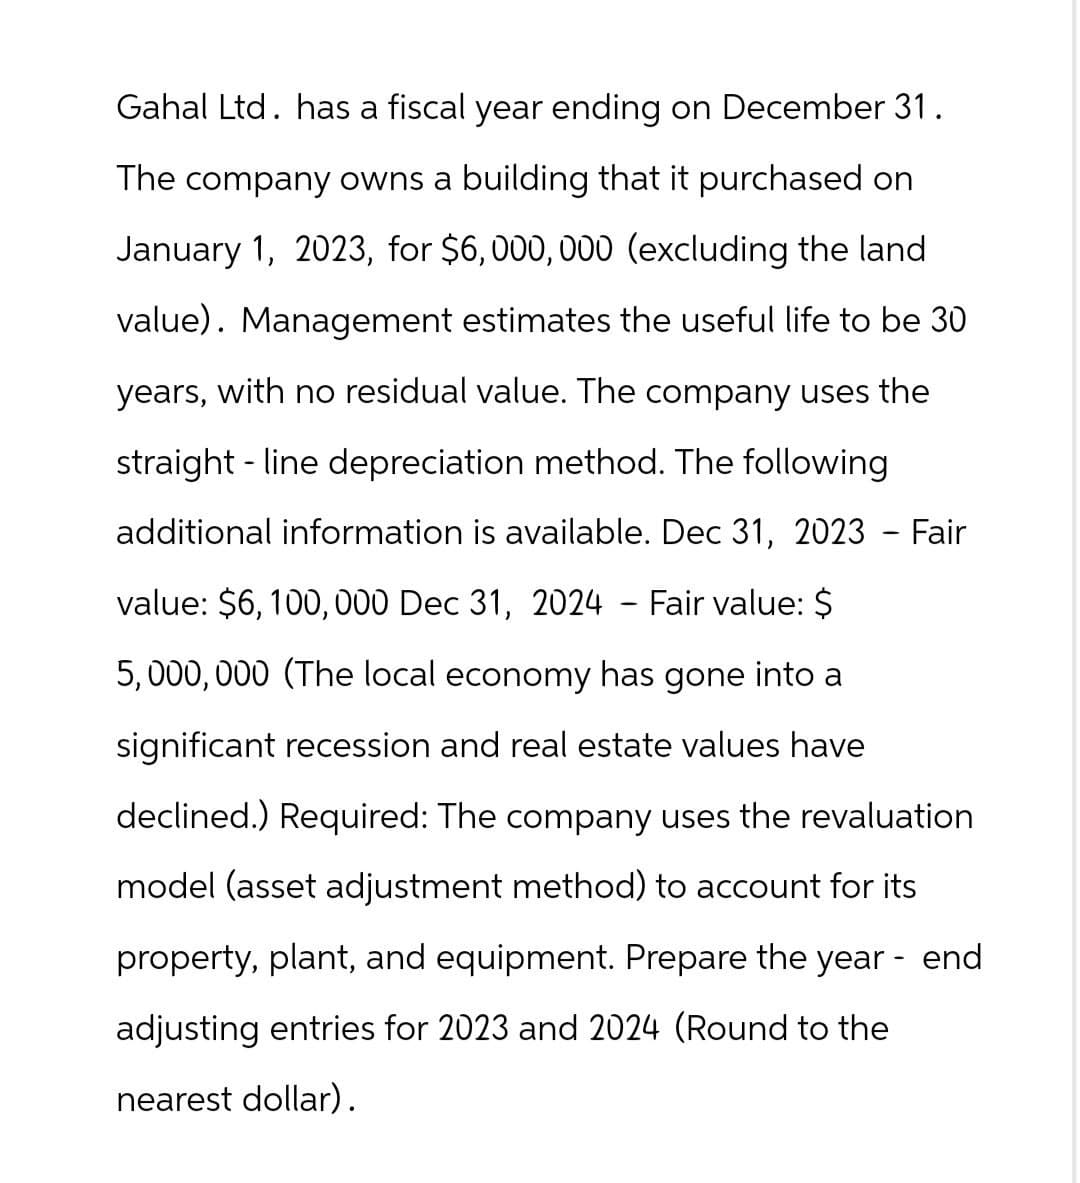 Gahal Ltd. has a fiscal year ending on December 31.
The company owns a building that it purchased on
January 1, 2023, for $6,000,000 (excluding the land
value). Management estimates the useful life to be 30
years, with no residual value. The company uses the
-
straight line depreciation method. The following
additional information is available. Dec 31, 2023 - Fair
value: $6,100,000 Dec 31, 2024 - Fair value: $
5,000,000 (The local economy has gone into a
significant recession and real estate values have
declined.) Required: The company uses the revaluation
model (asset adjustment method) to account for its
property, plant, and equipment. Prepare the year - end
adjusting entries for 2023 and 2024 (Round to the
nearest dollar).